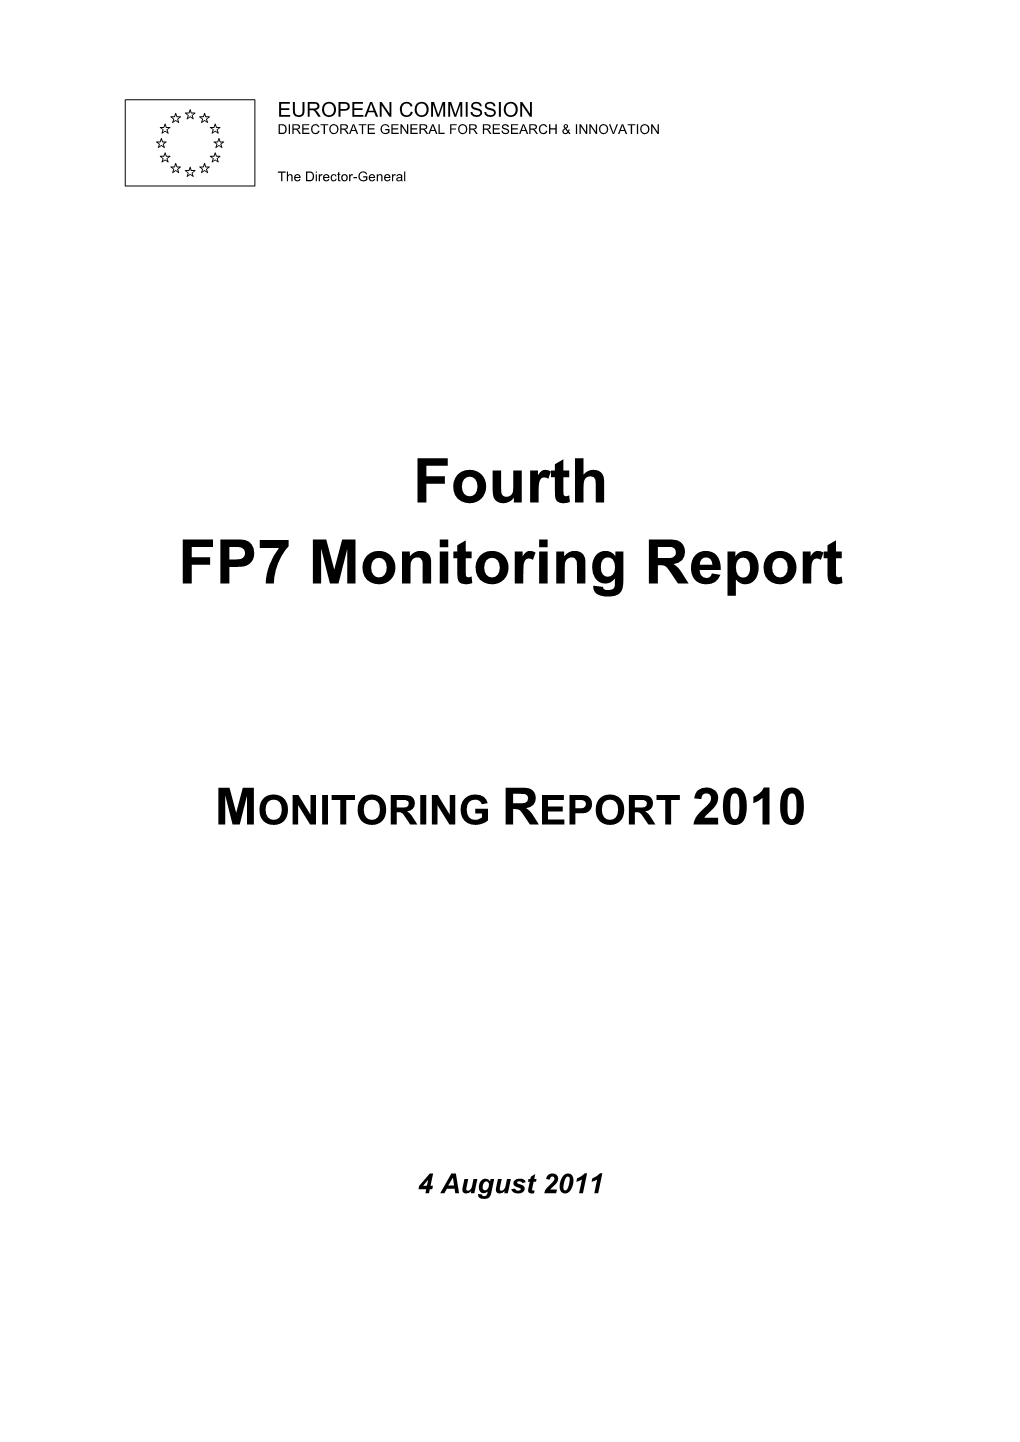 Fourth FP7 Monitoring Report